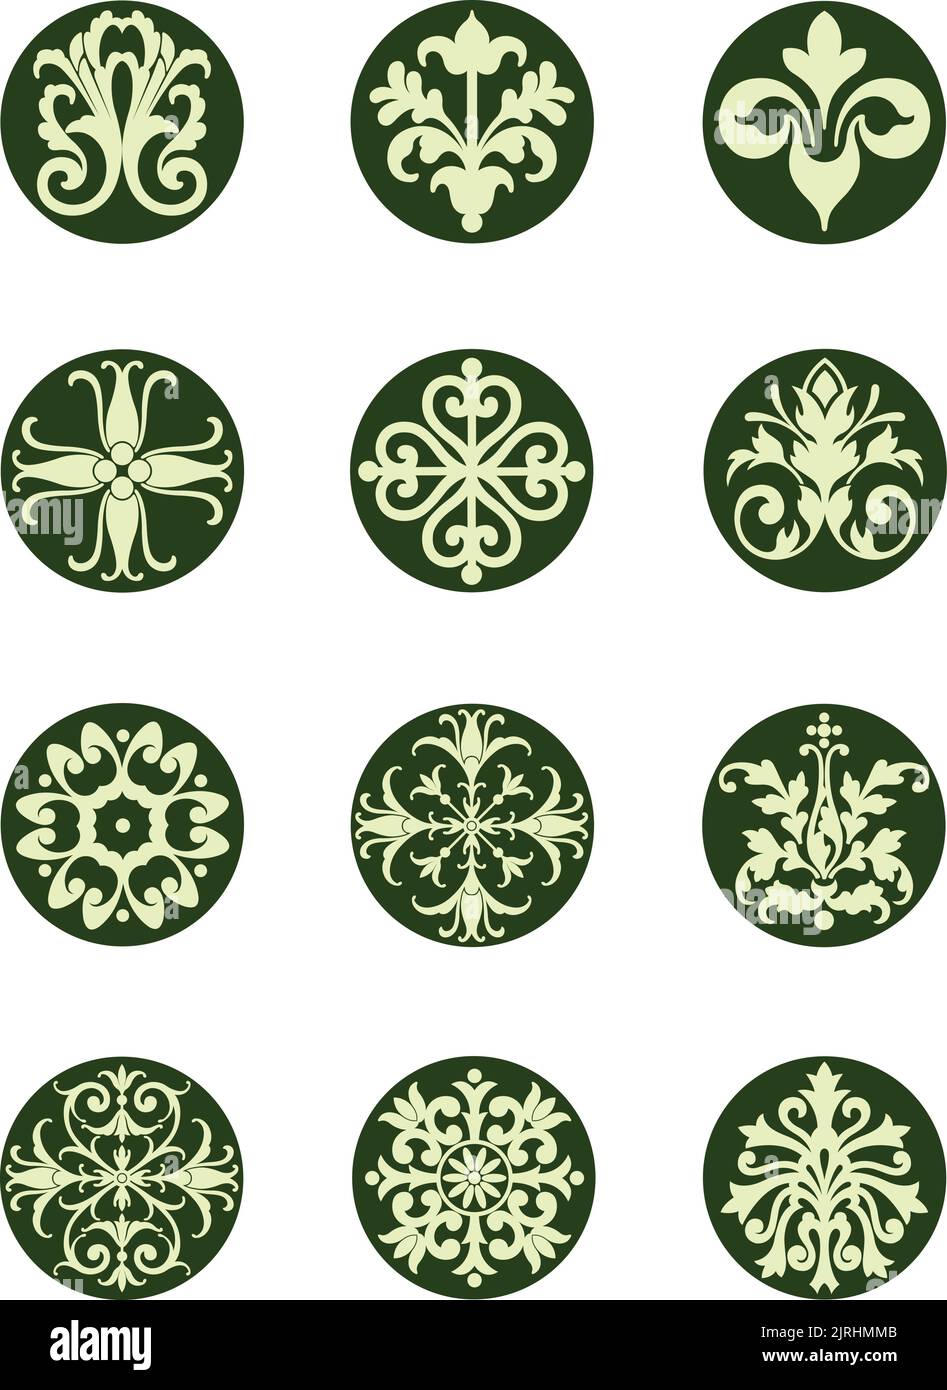 A set of vintage vector decorative round floral icons. Stock Vector